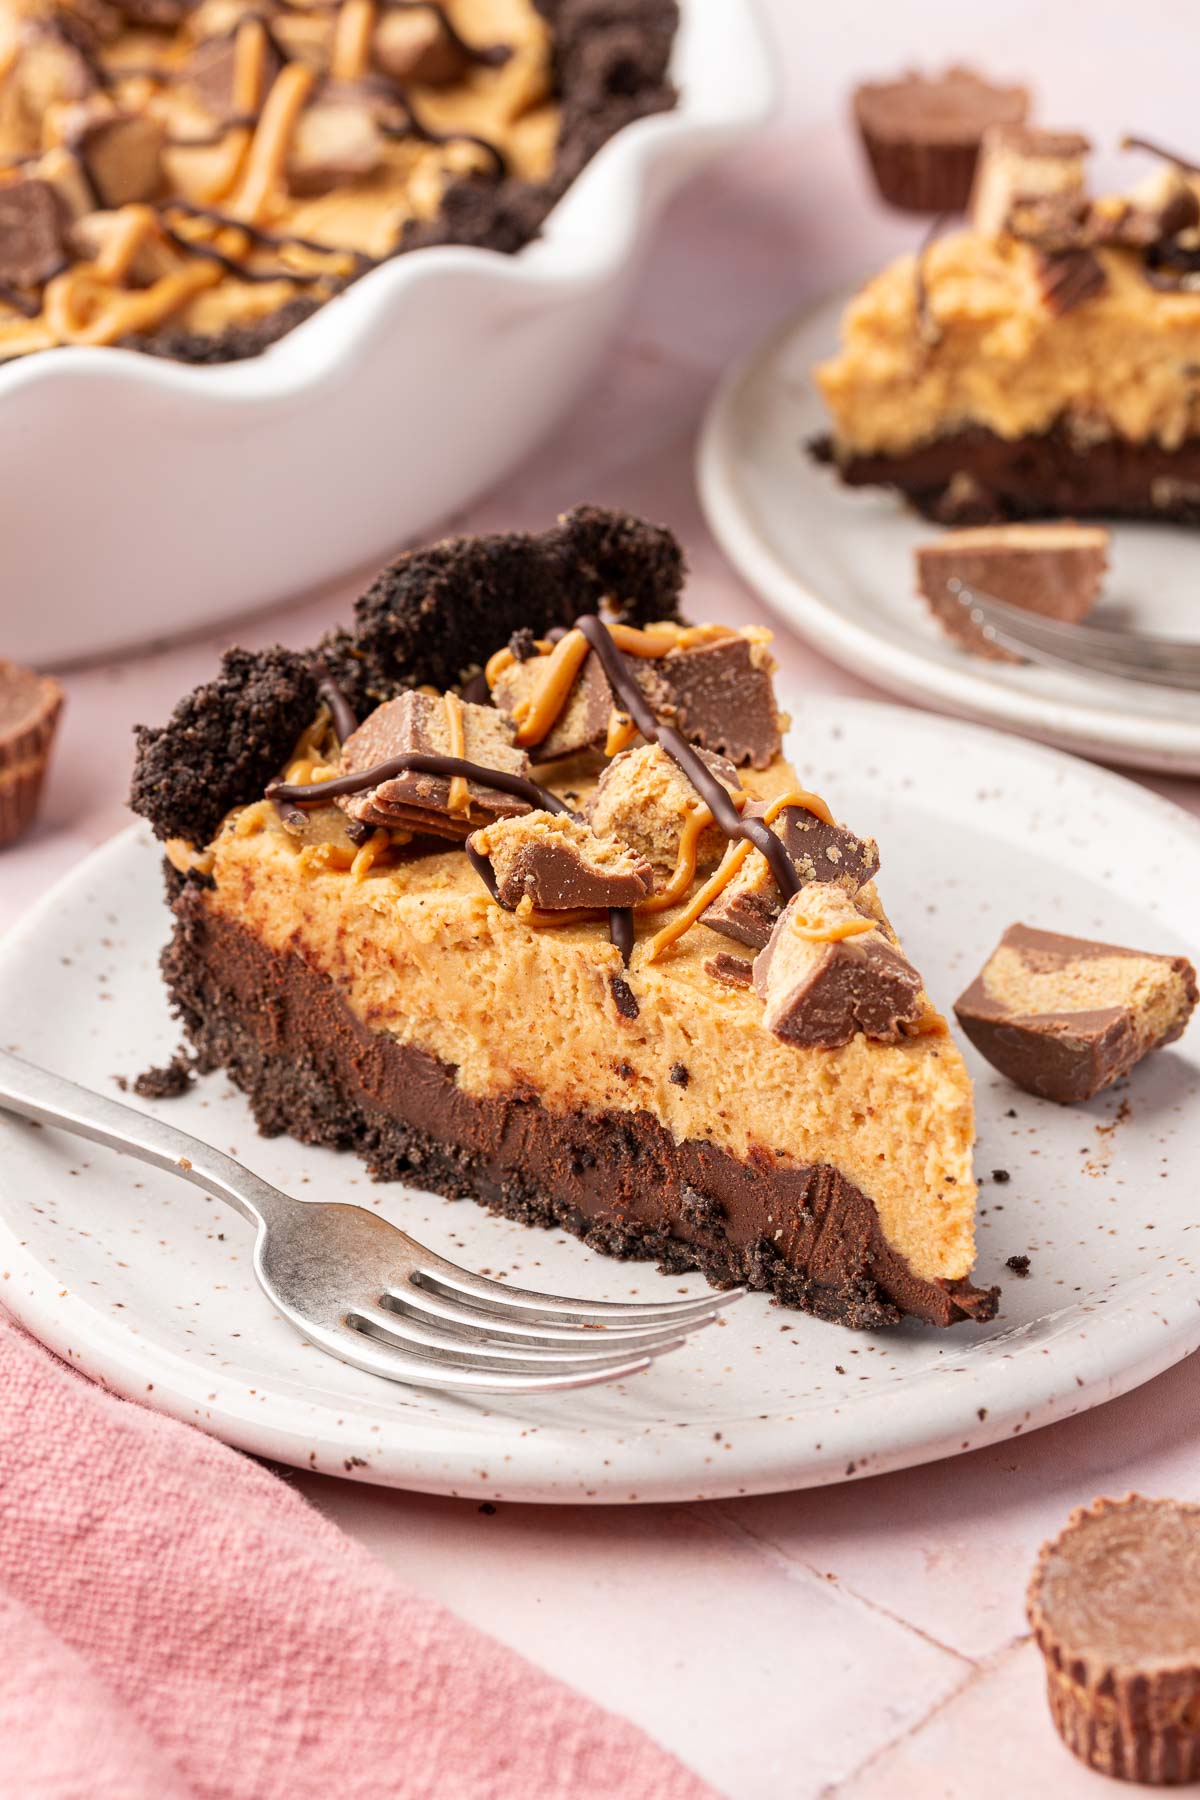 A single slice of Oreo peanut butter pie with chocolate ganache and reese's peanut butter cups on a plate with a fork.